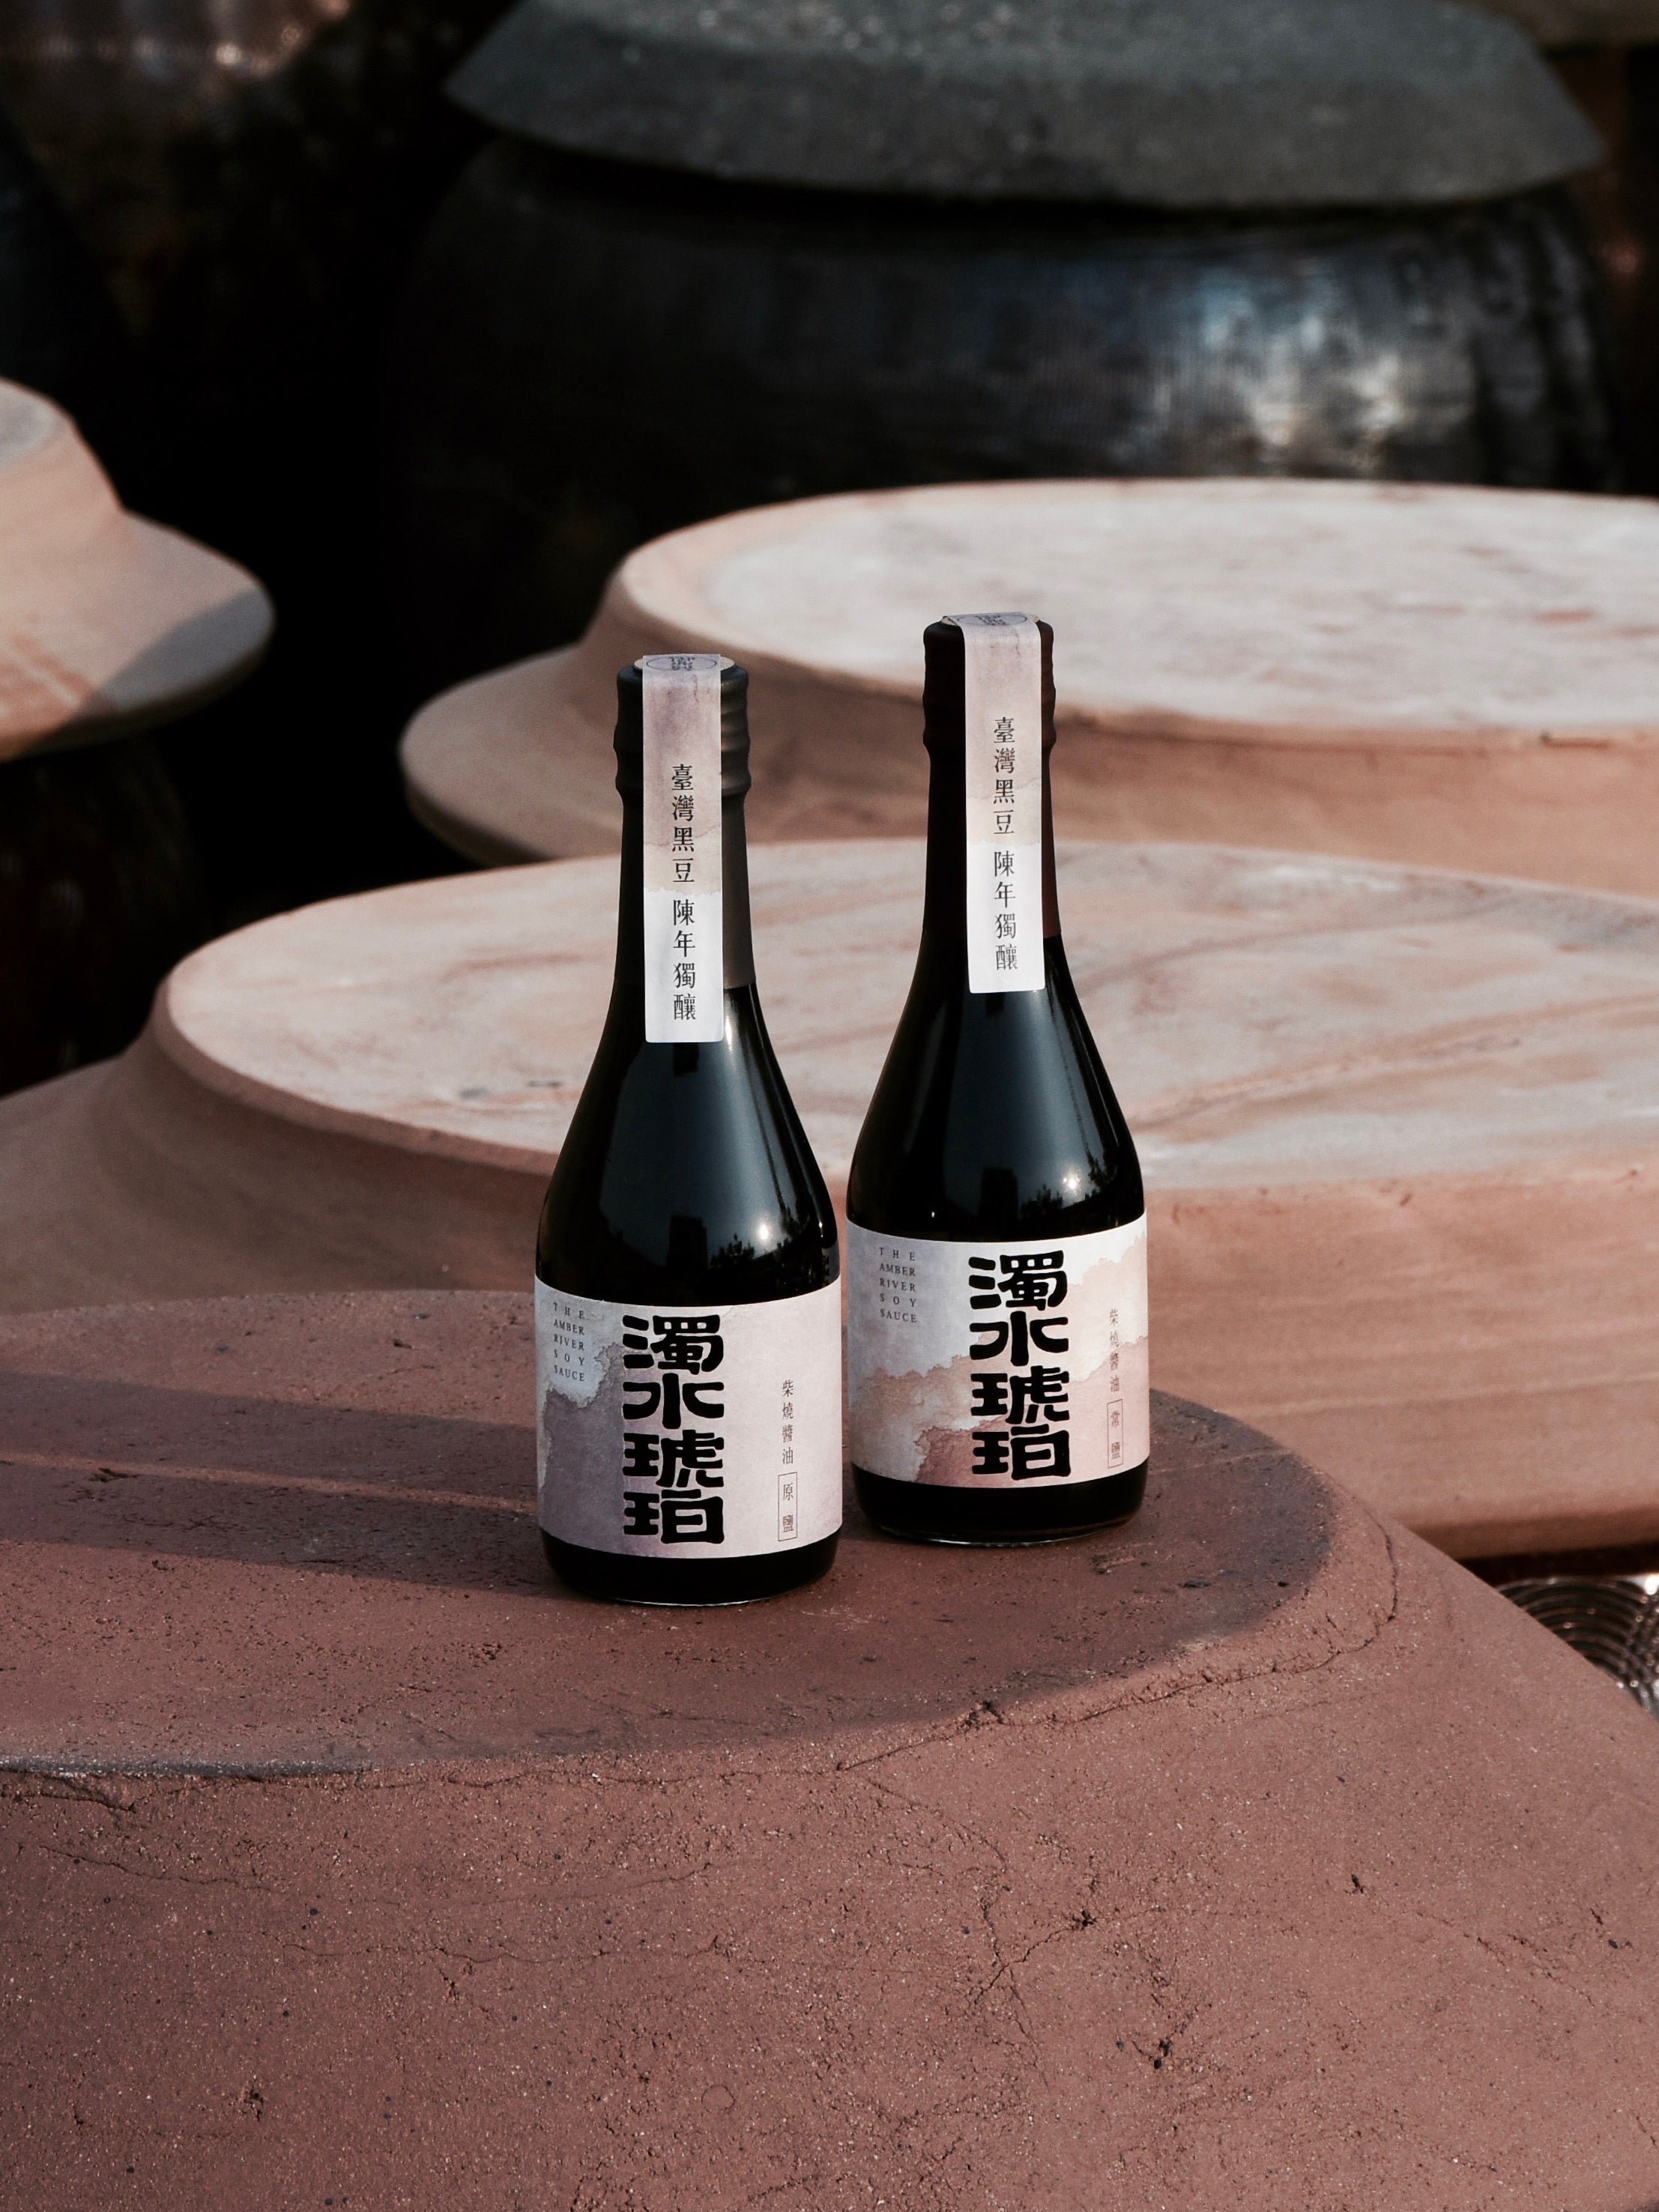 Amber River Soy Sauce